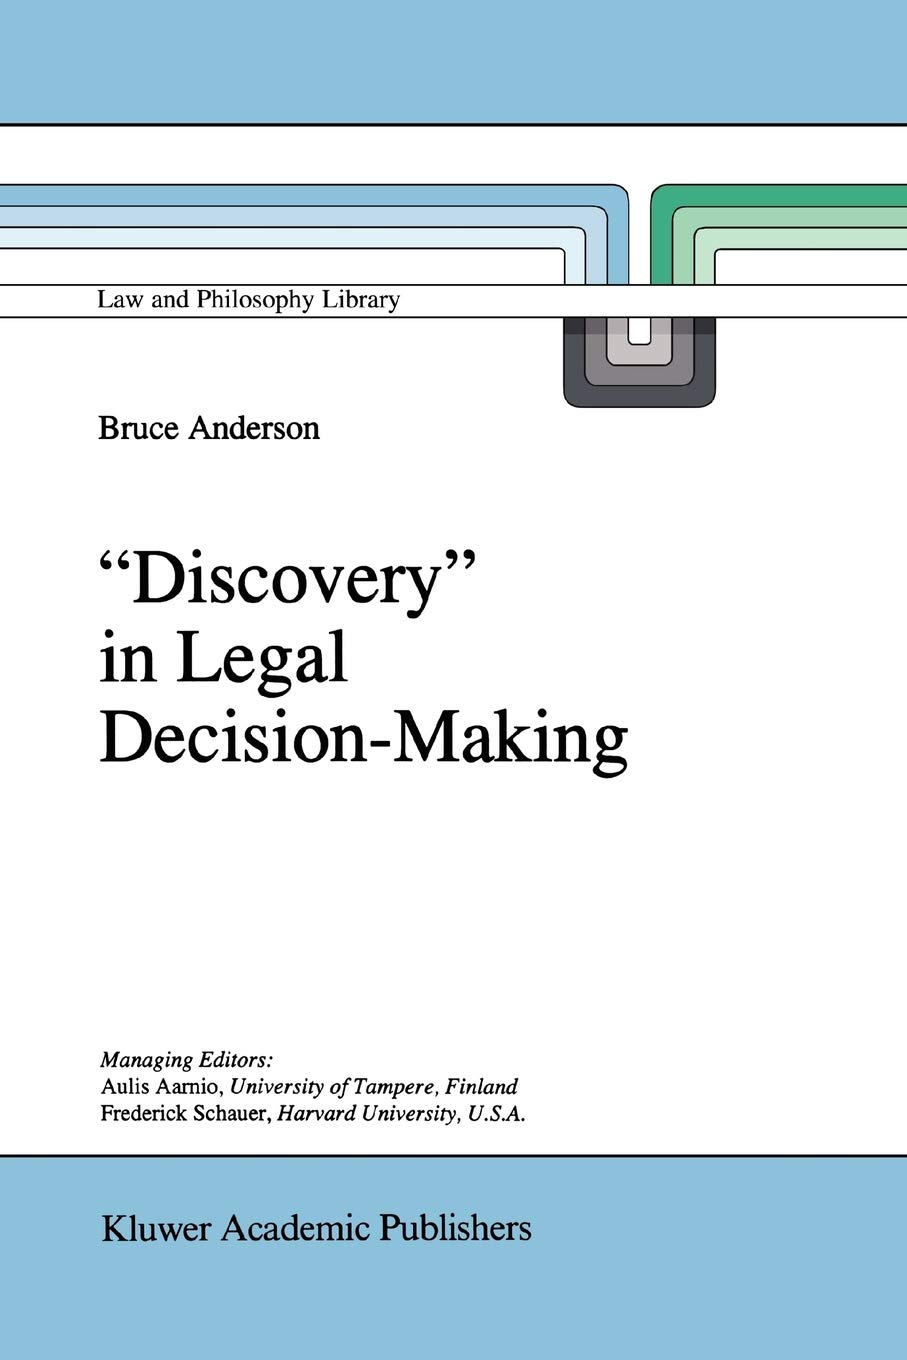 `Discovery' in Legal Decision-Making (Law and Philosophy Library, 24)